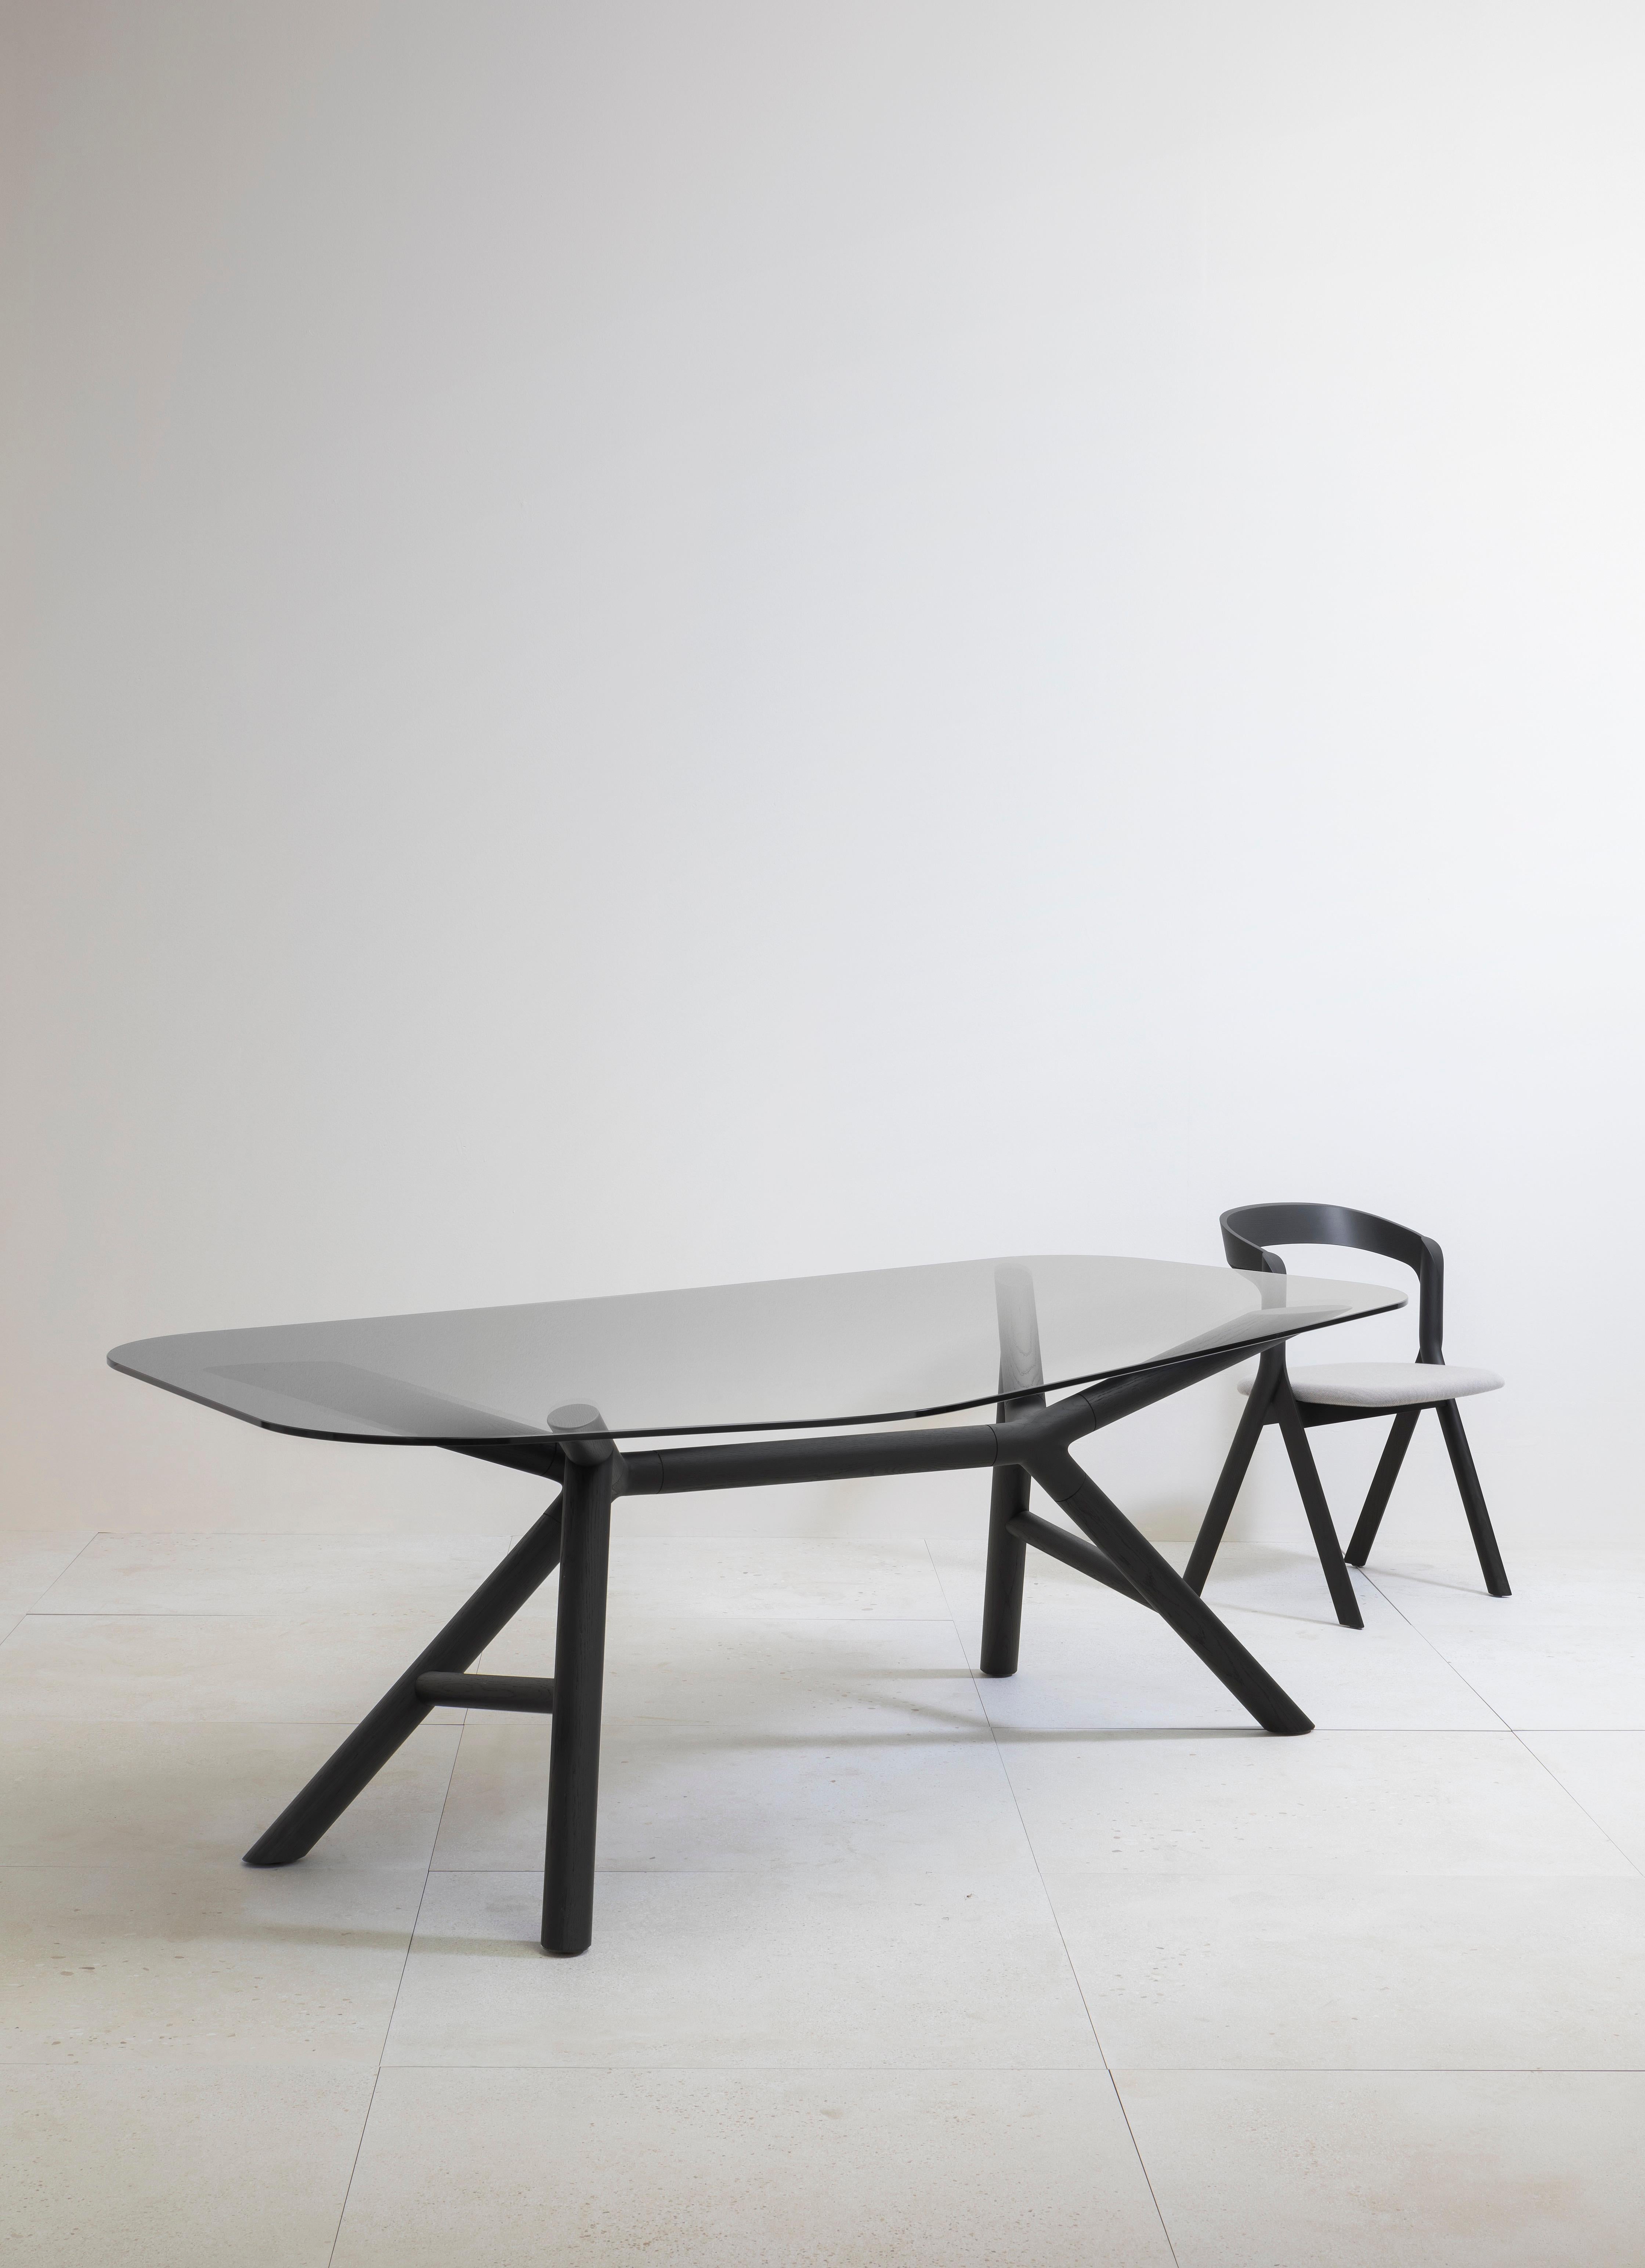 Otto is a quick gesture, a drawing where the lines quickly intersect to create asymmetric architectures on a table that is now one of our icons. Built on environmentally friendly and fully recyclable materials. Winner of Young and Design